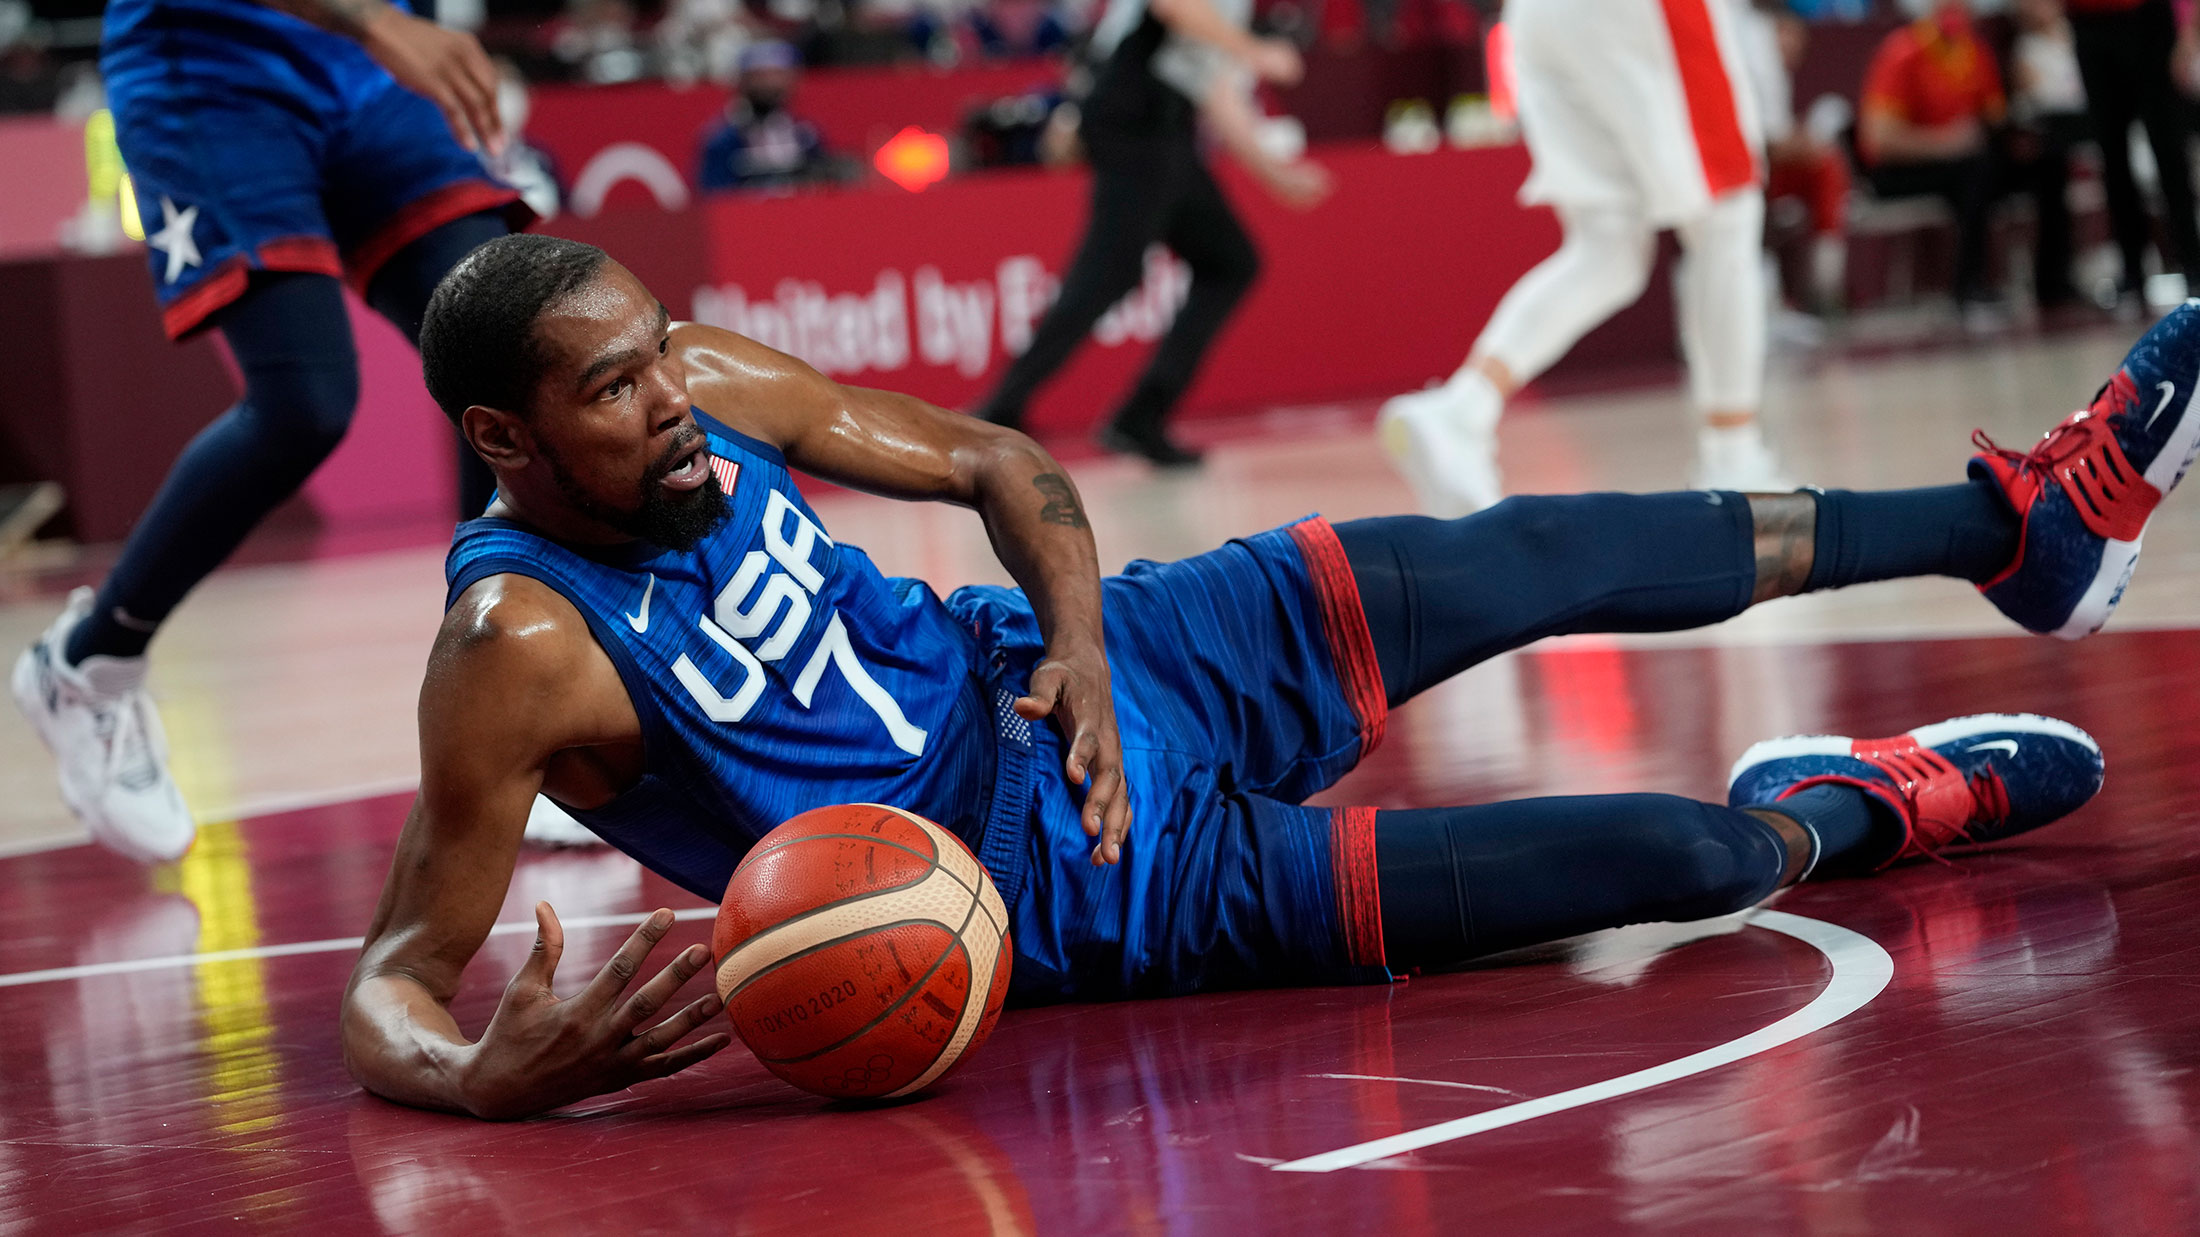 Watch Live Team Usa Men S Basketball Will Advance To Gold Medal Game If They Beat Australia